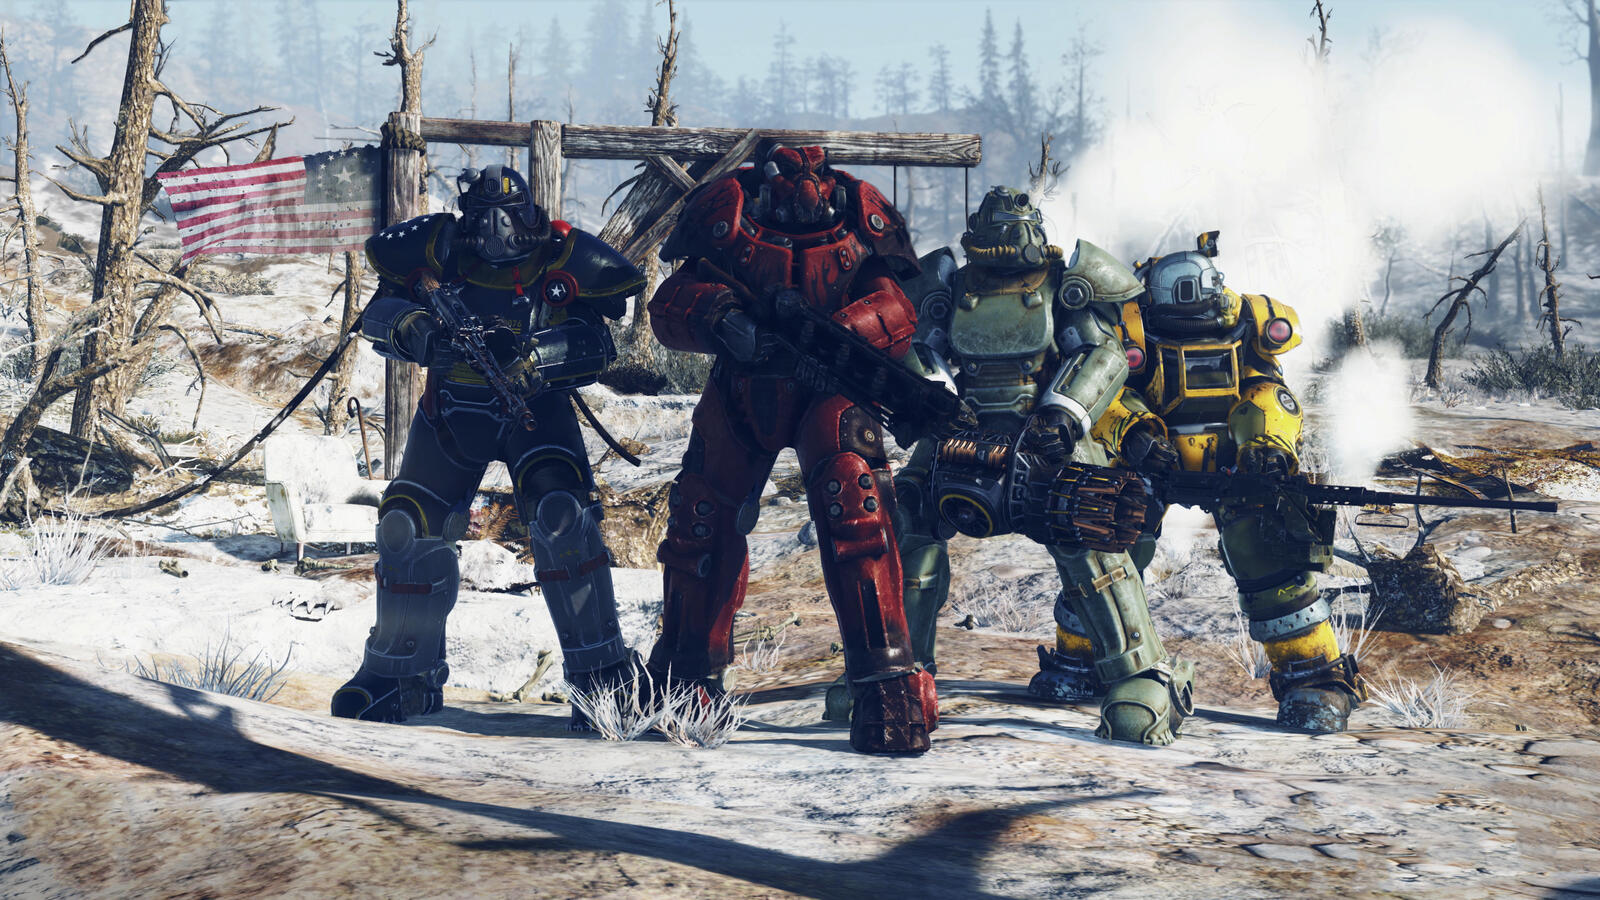 Wallpapers fallout 76 games the 2018 Games on the desktop